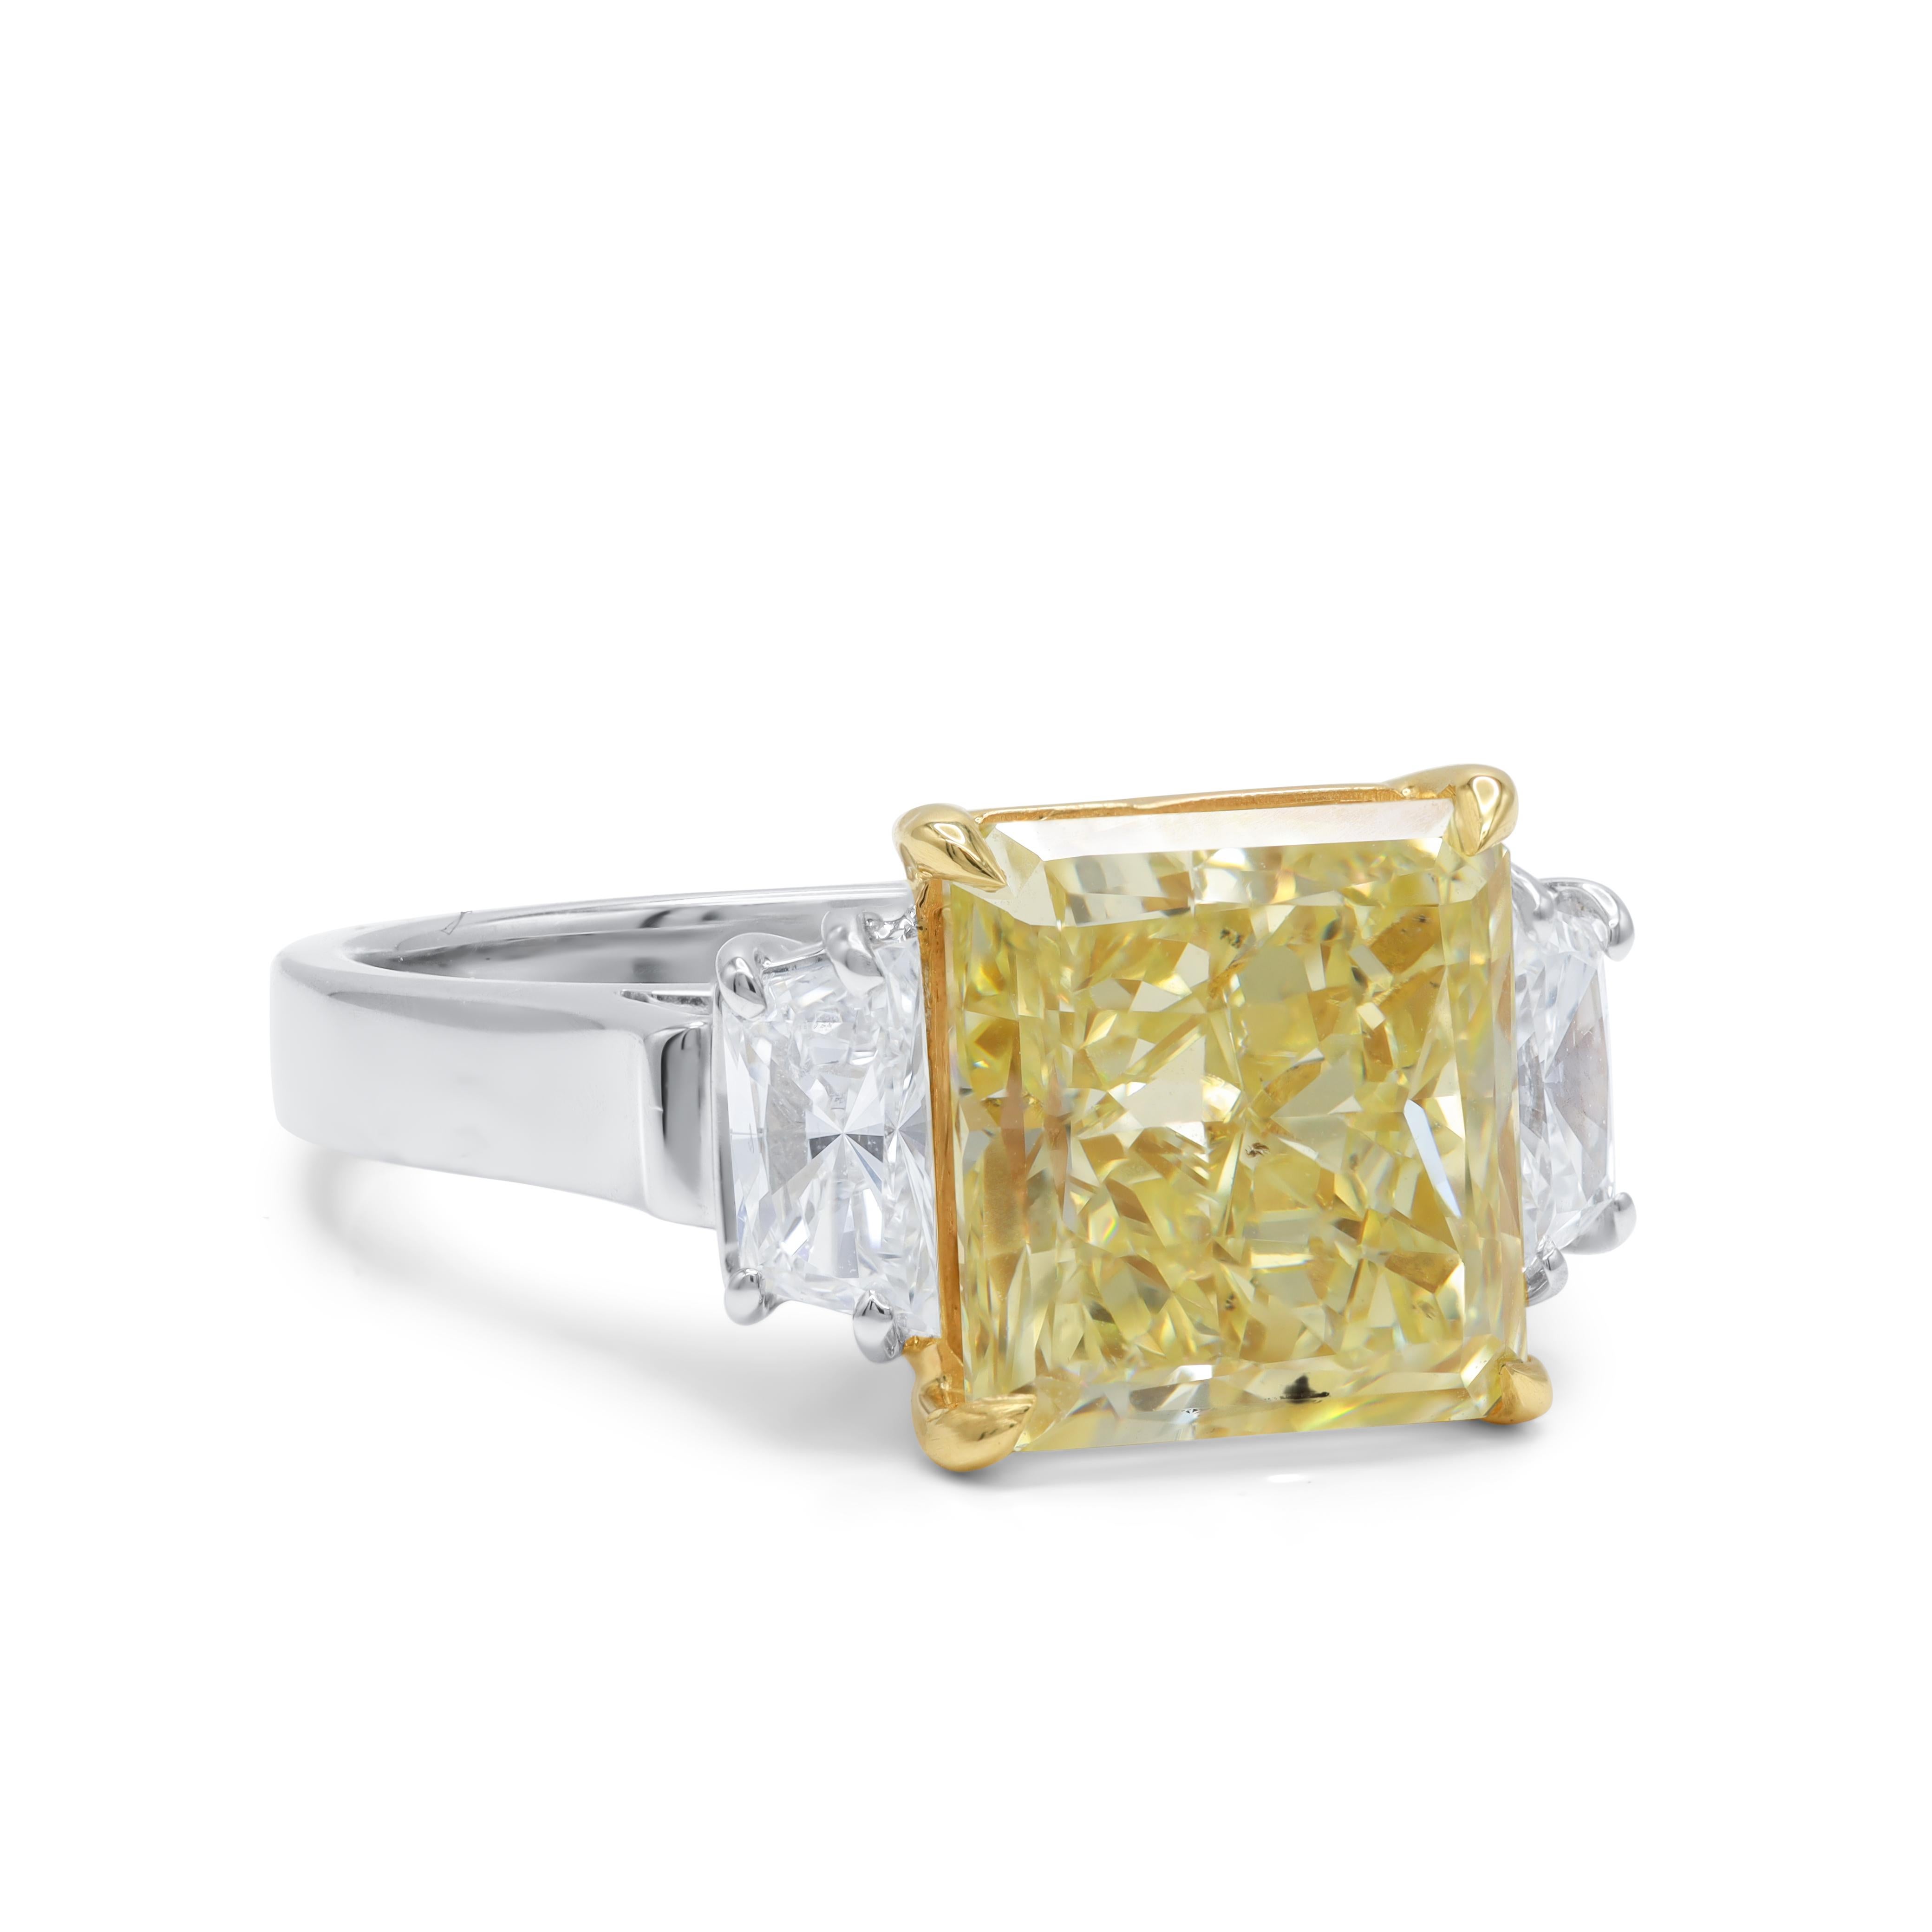  
Platinum and 18kt diamond engagement ring with center diamond 5.16ct Fancy Yellow SI1 GIA certifies 5.16cts with .90cts of trapezoids on the sides 
